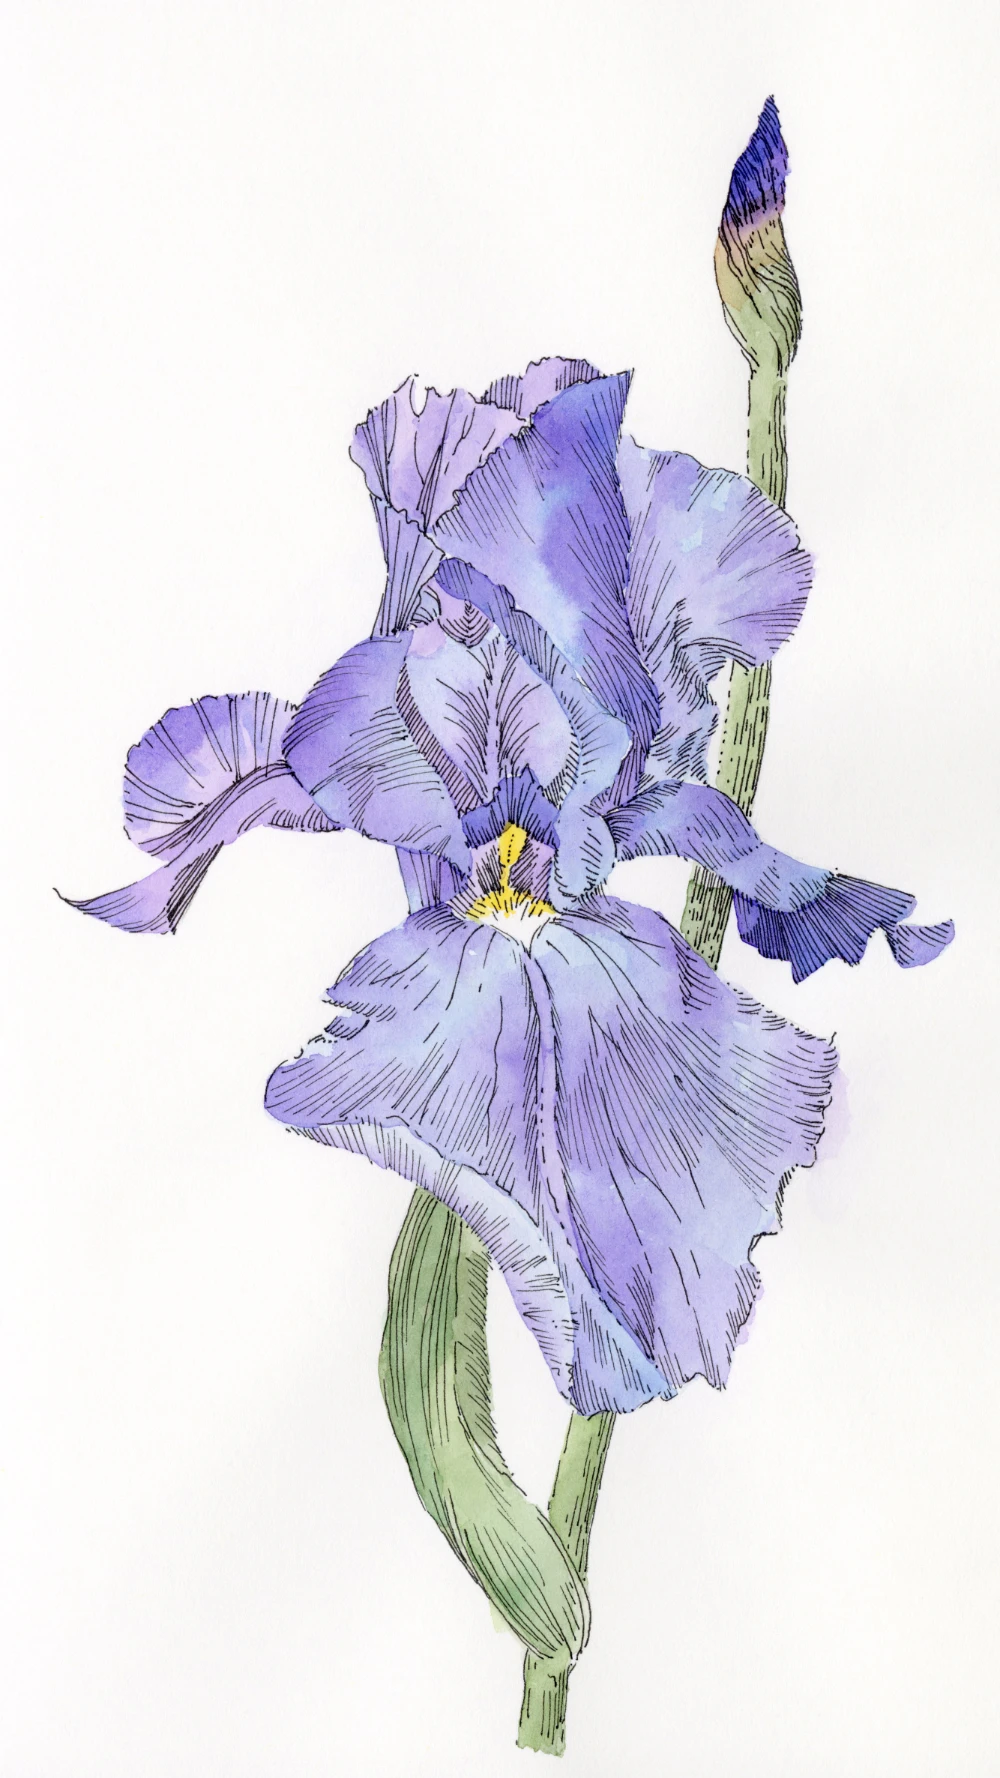 An ink and watercolor drawing of a purple and blue iris by Carolyn A Pappas.